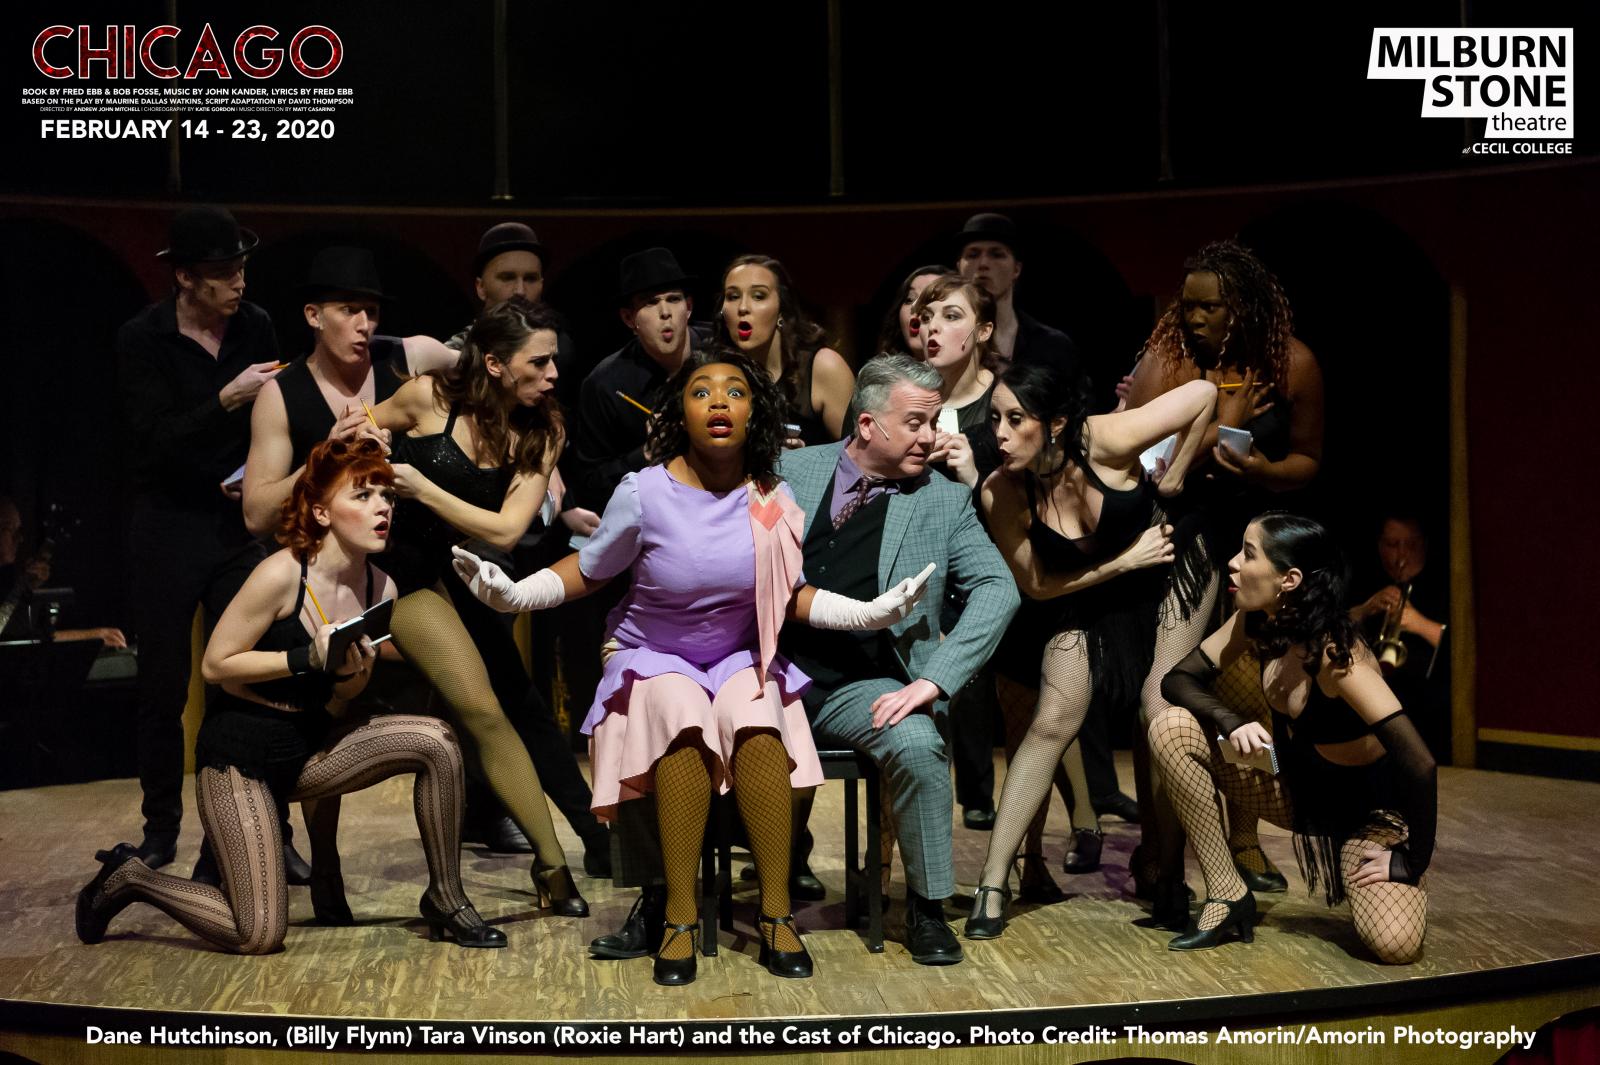 Tara Vinson, Dane Hutchinson and the cast of CHICAGO at the Milburn Stone Theatre. Choreography by Katie Gordon, Music Direction by Matt Casarino, Direction by Andrew John Mitchell and photography by Thomas Amorin.